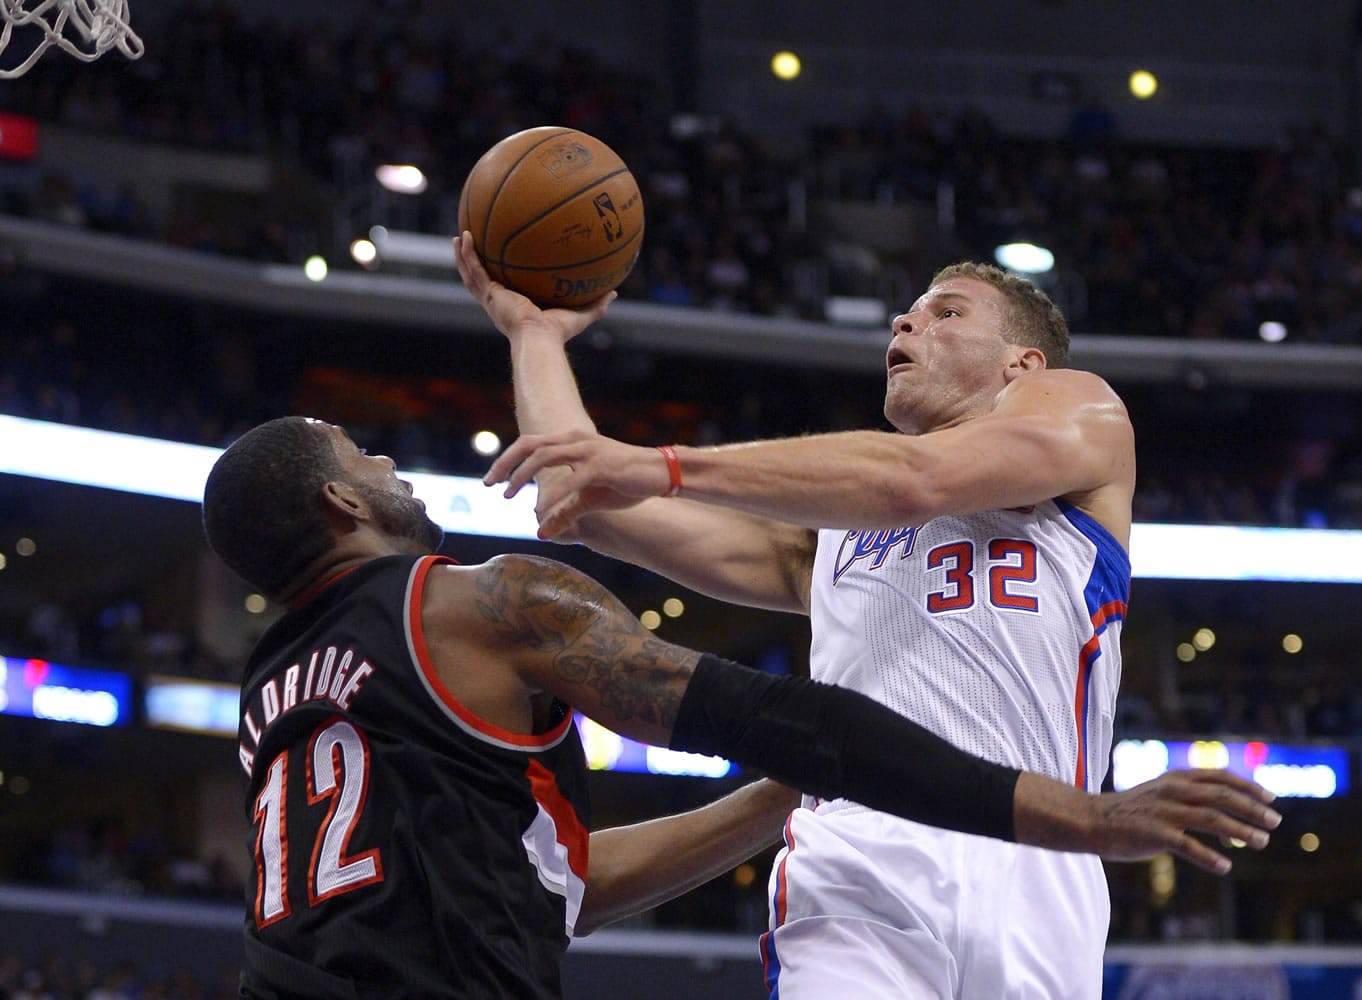 Los Angeles Clippers forward Blake Griffin, right, puts up a shot as Portland Trail Blazers forward LaMarcus Aldridge defends during the first half of an NBA basketball game, Wednesday, Feb. 12, 2014, in Los Angeles. (AP Photo/Mark J.